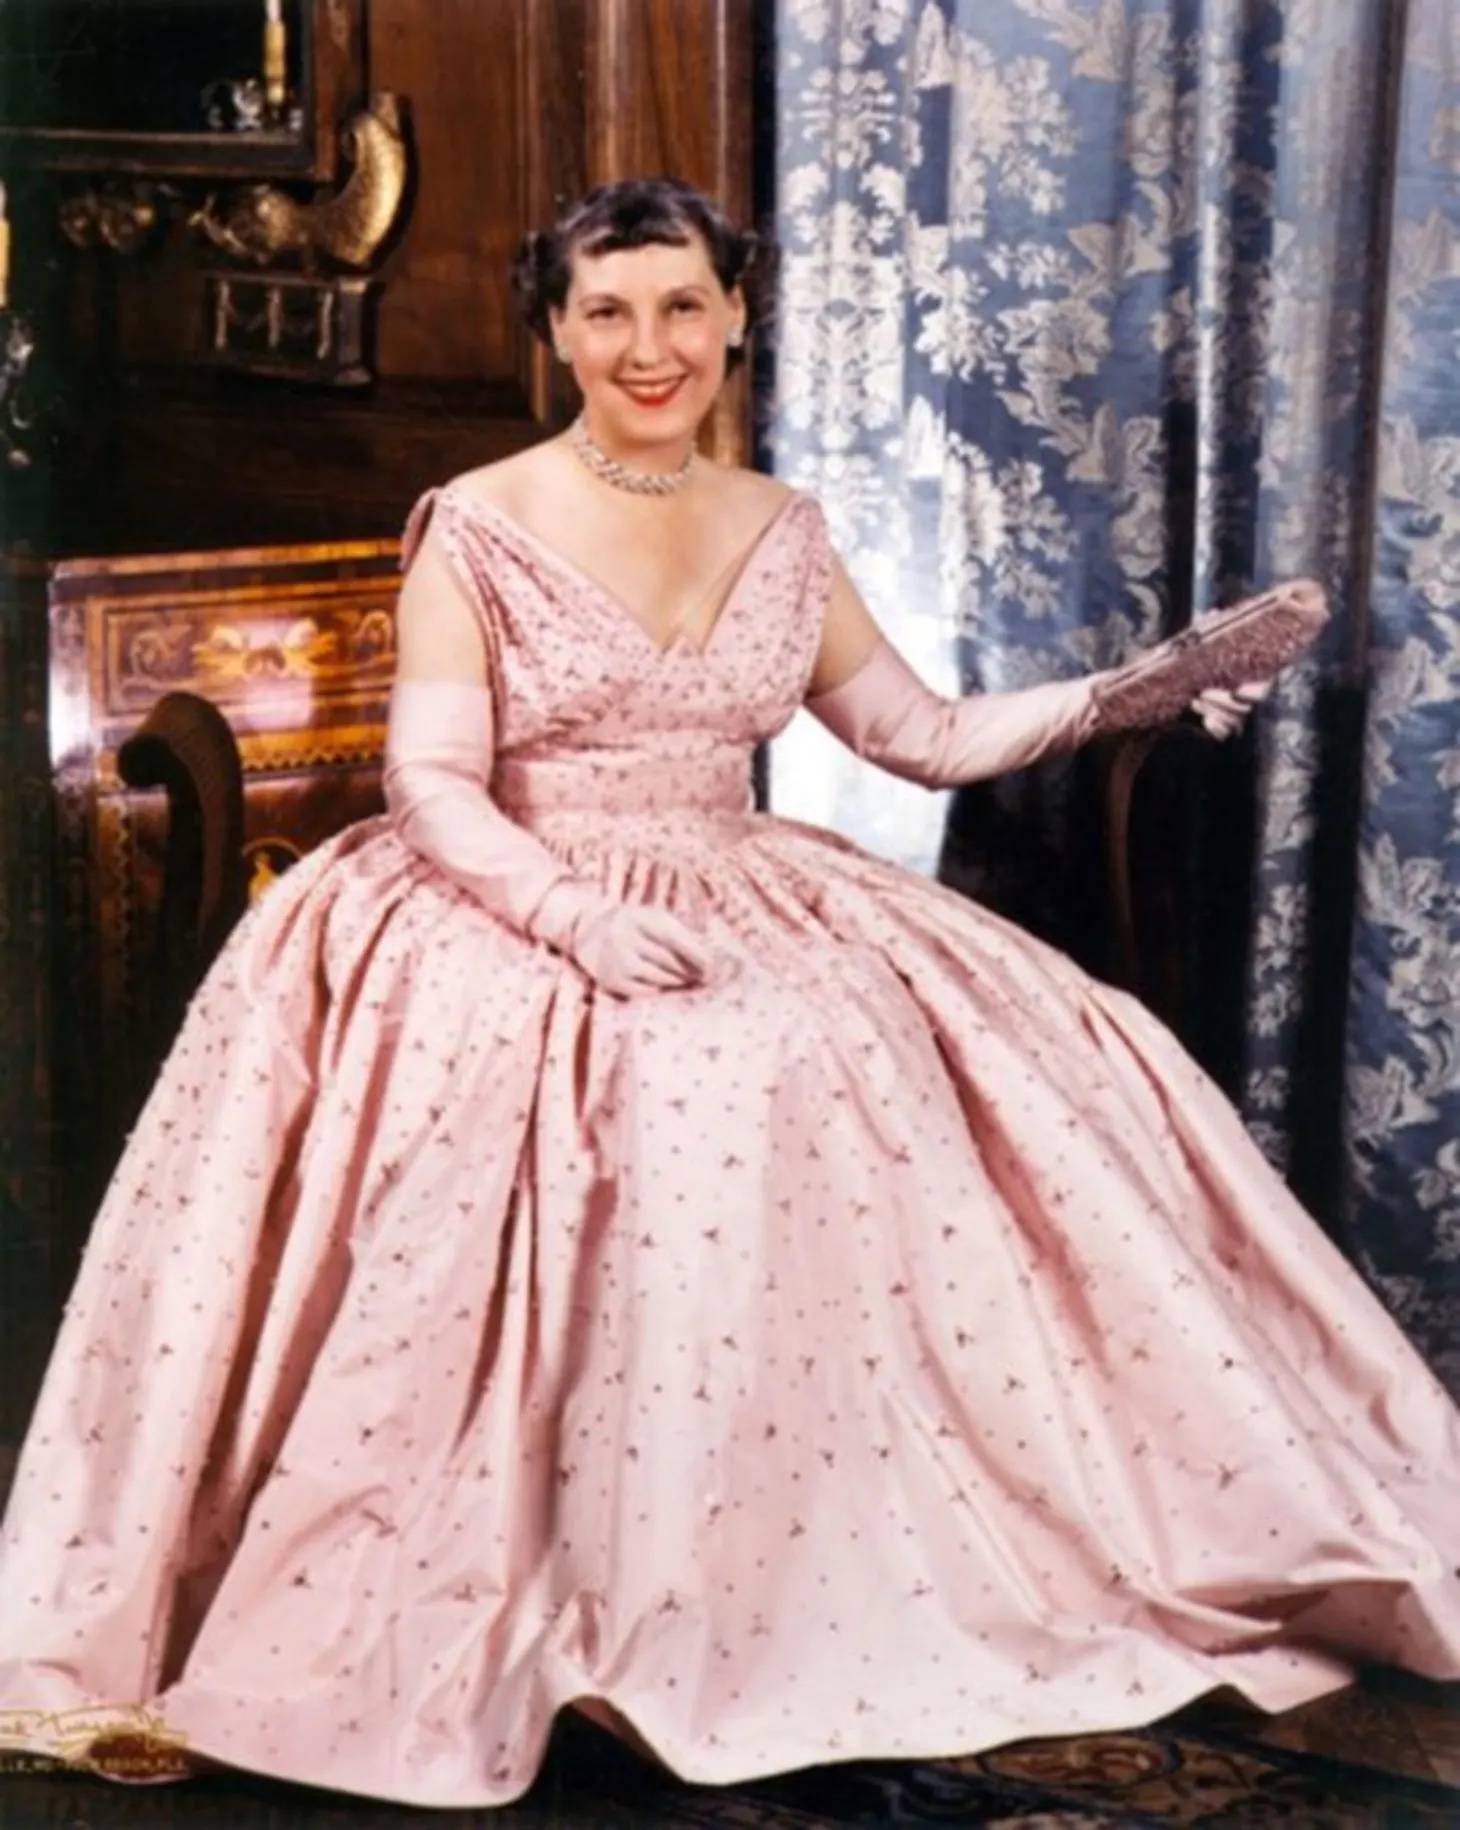 Mamie Eisenhower [Photo by National Archives]